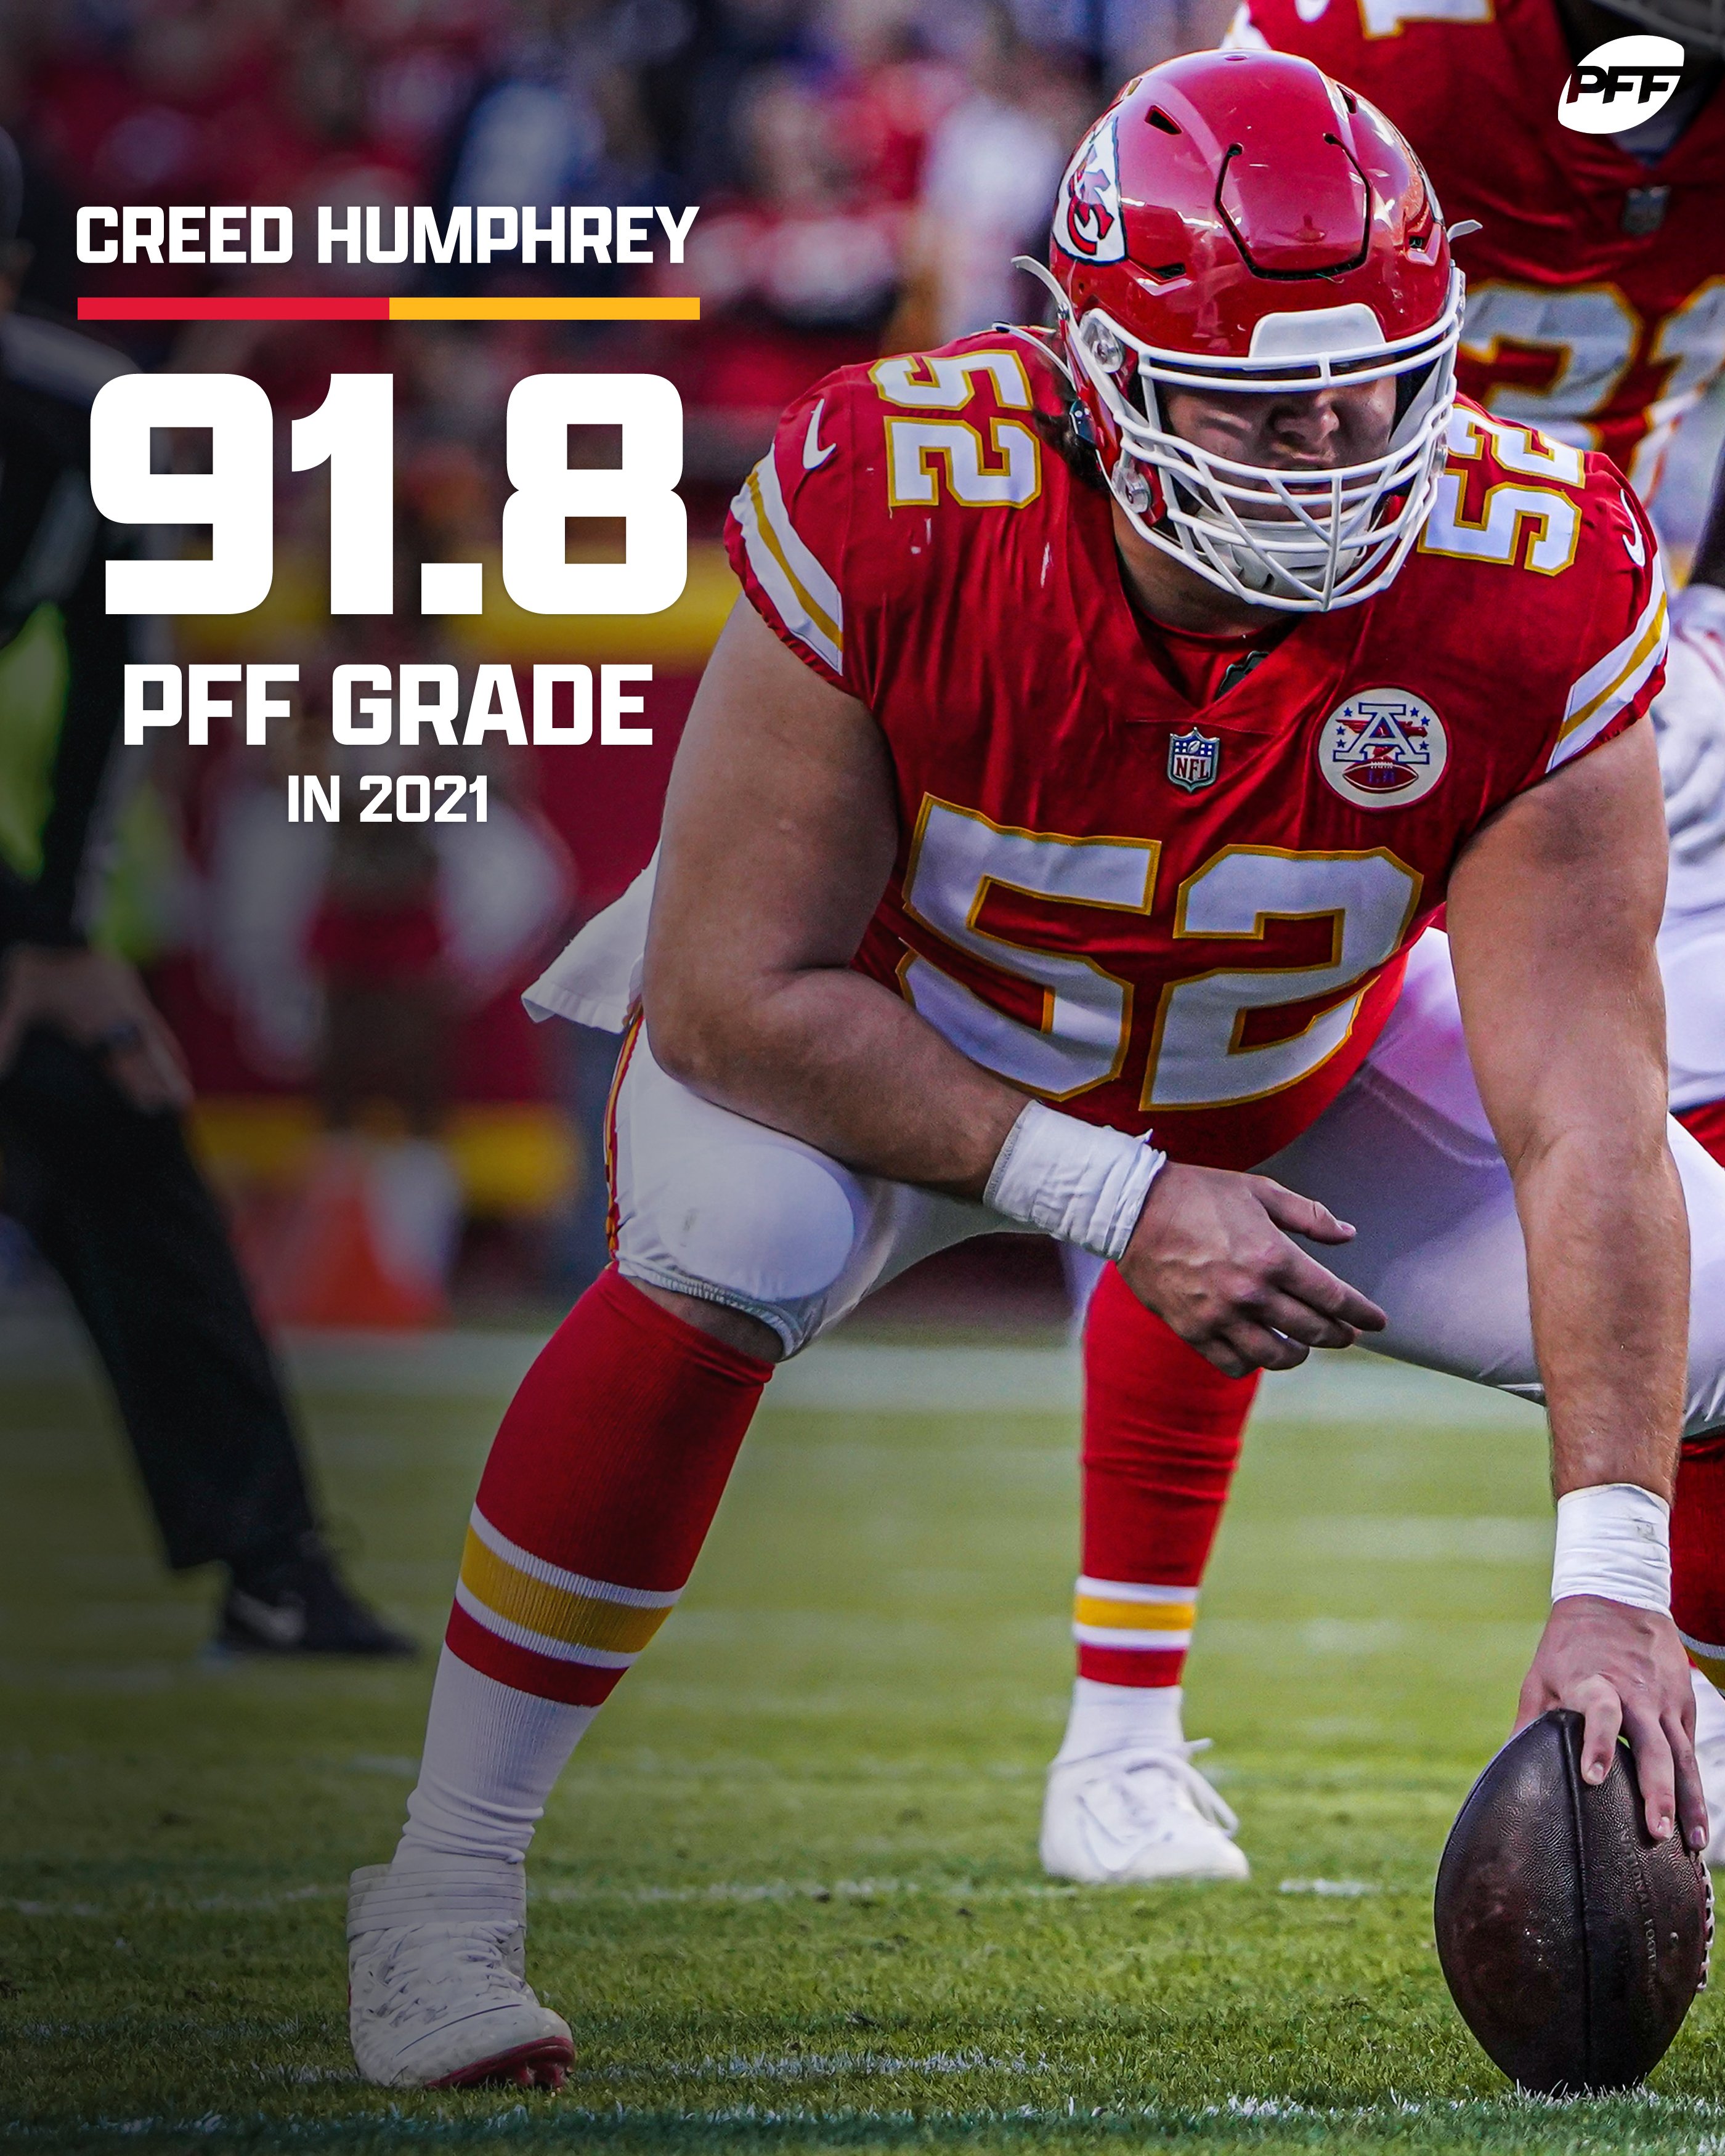 PFF on X: 'Creed Humphrey: Highest-graded rookie in PFF history